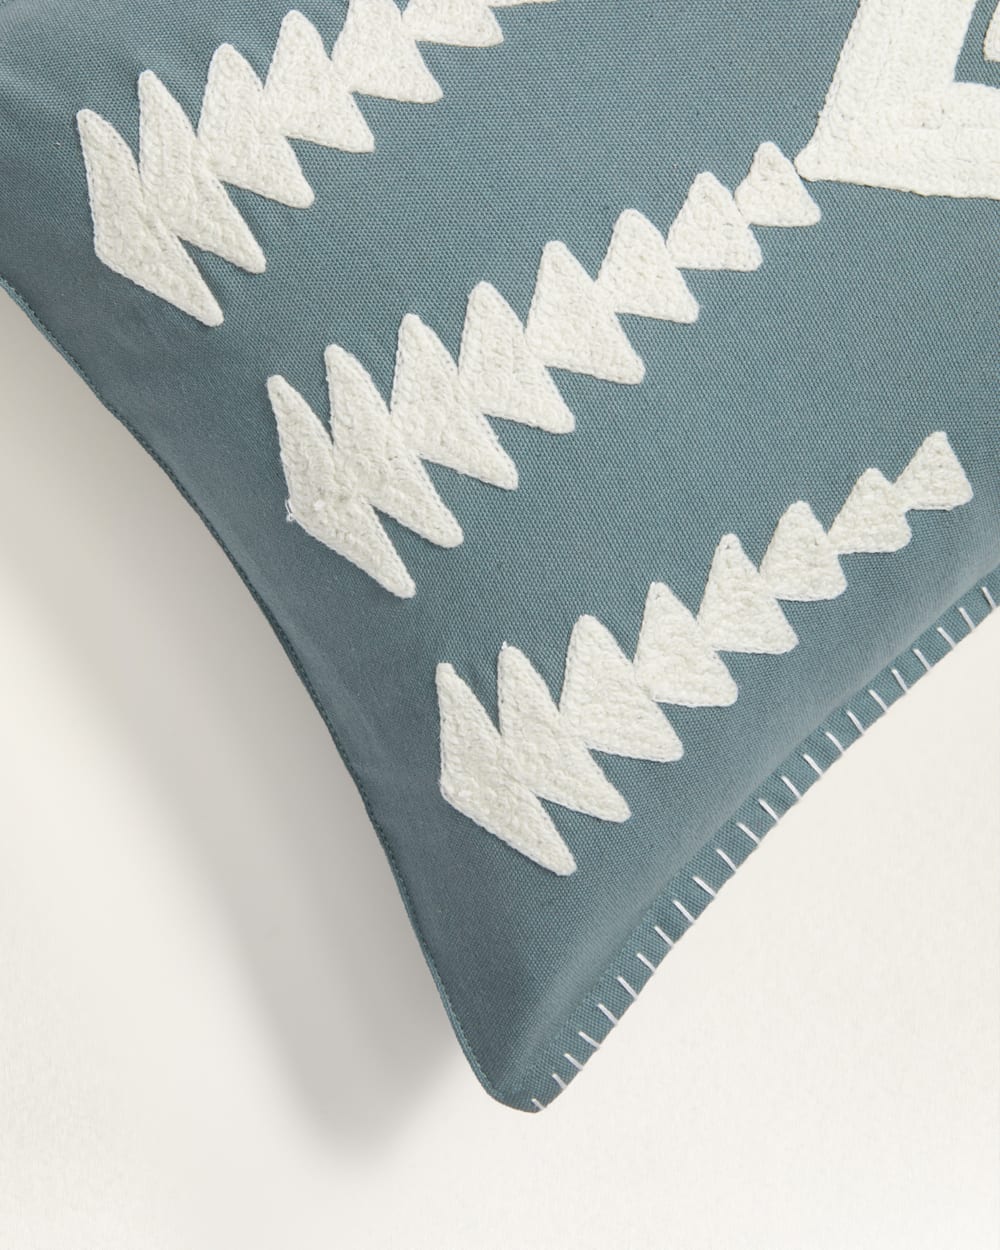 ALTERNATE VIEW OF HARDING EMBROIDERED HUG PILLOW IN SLATE image number 2